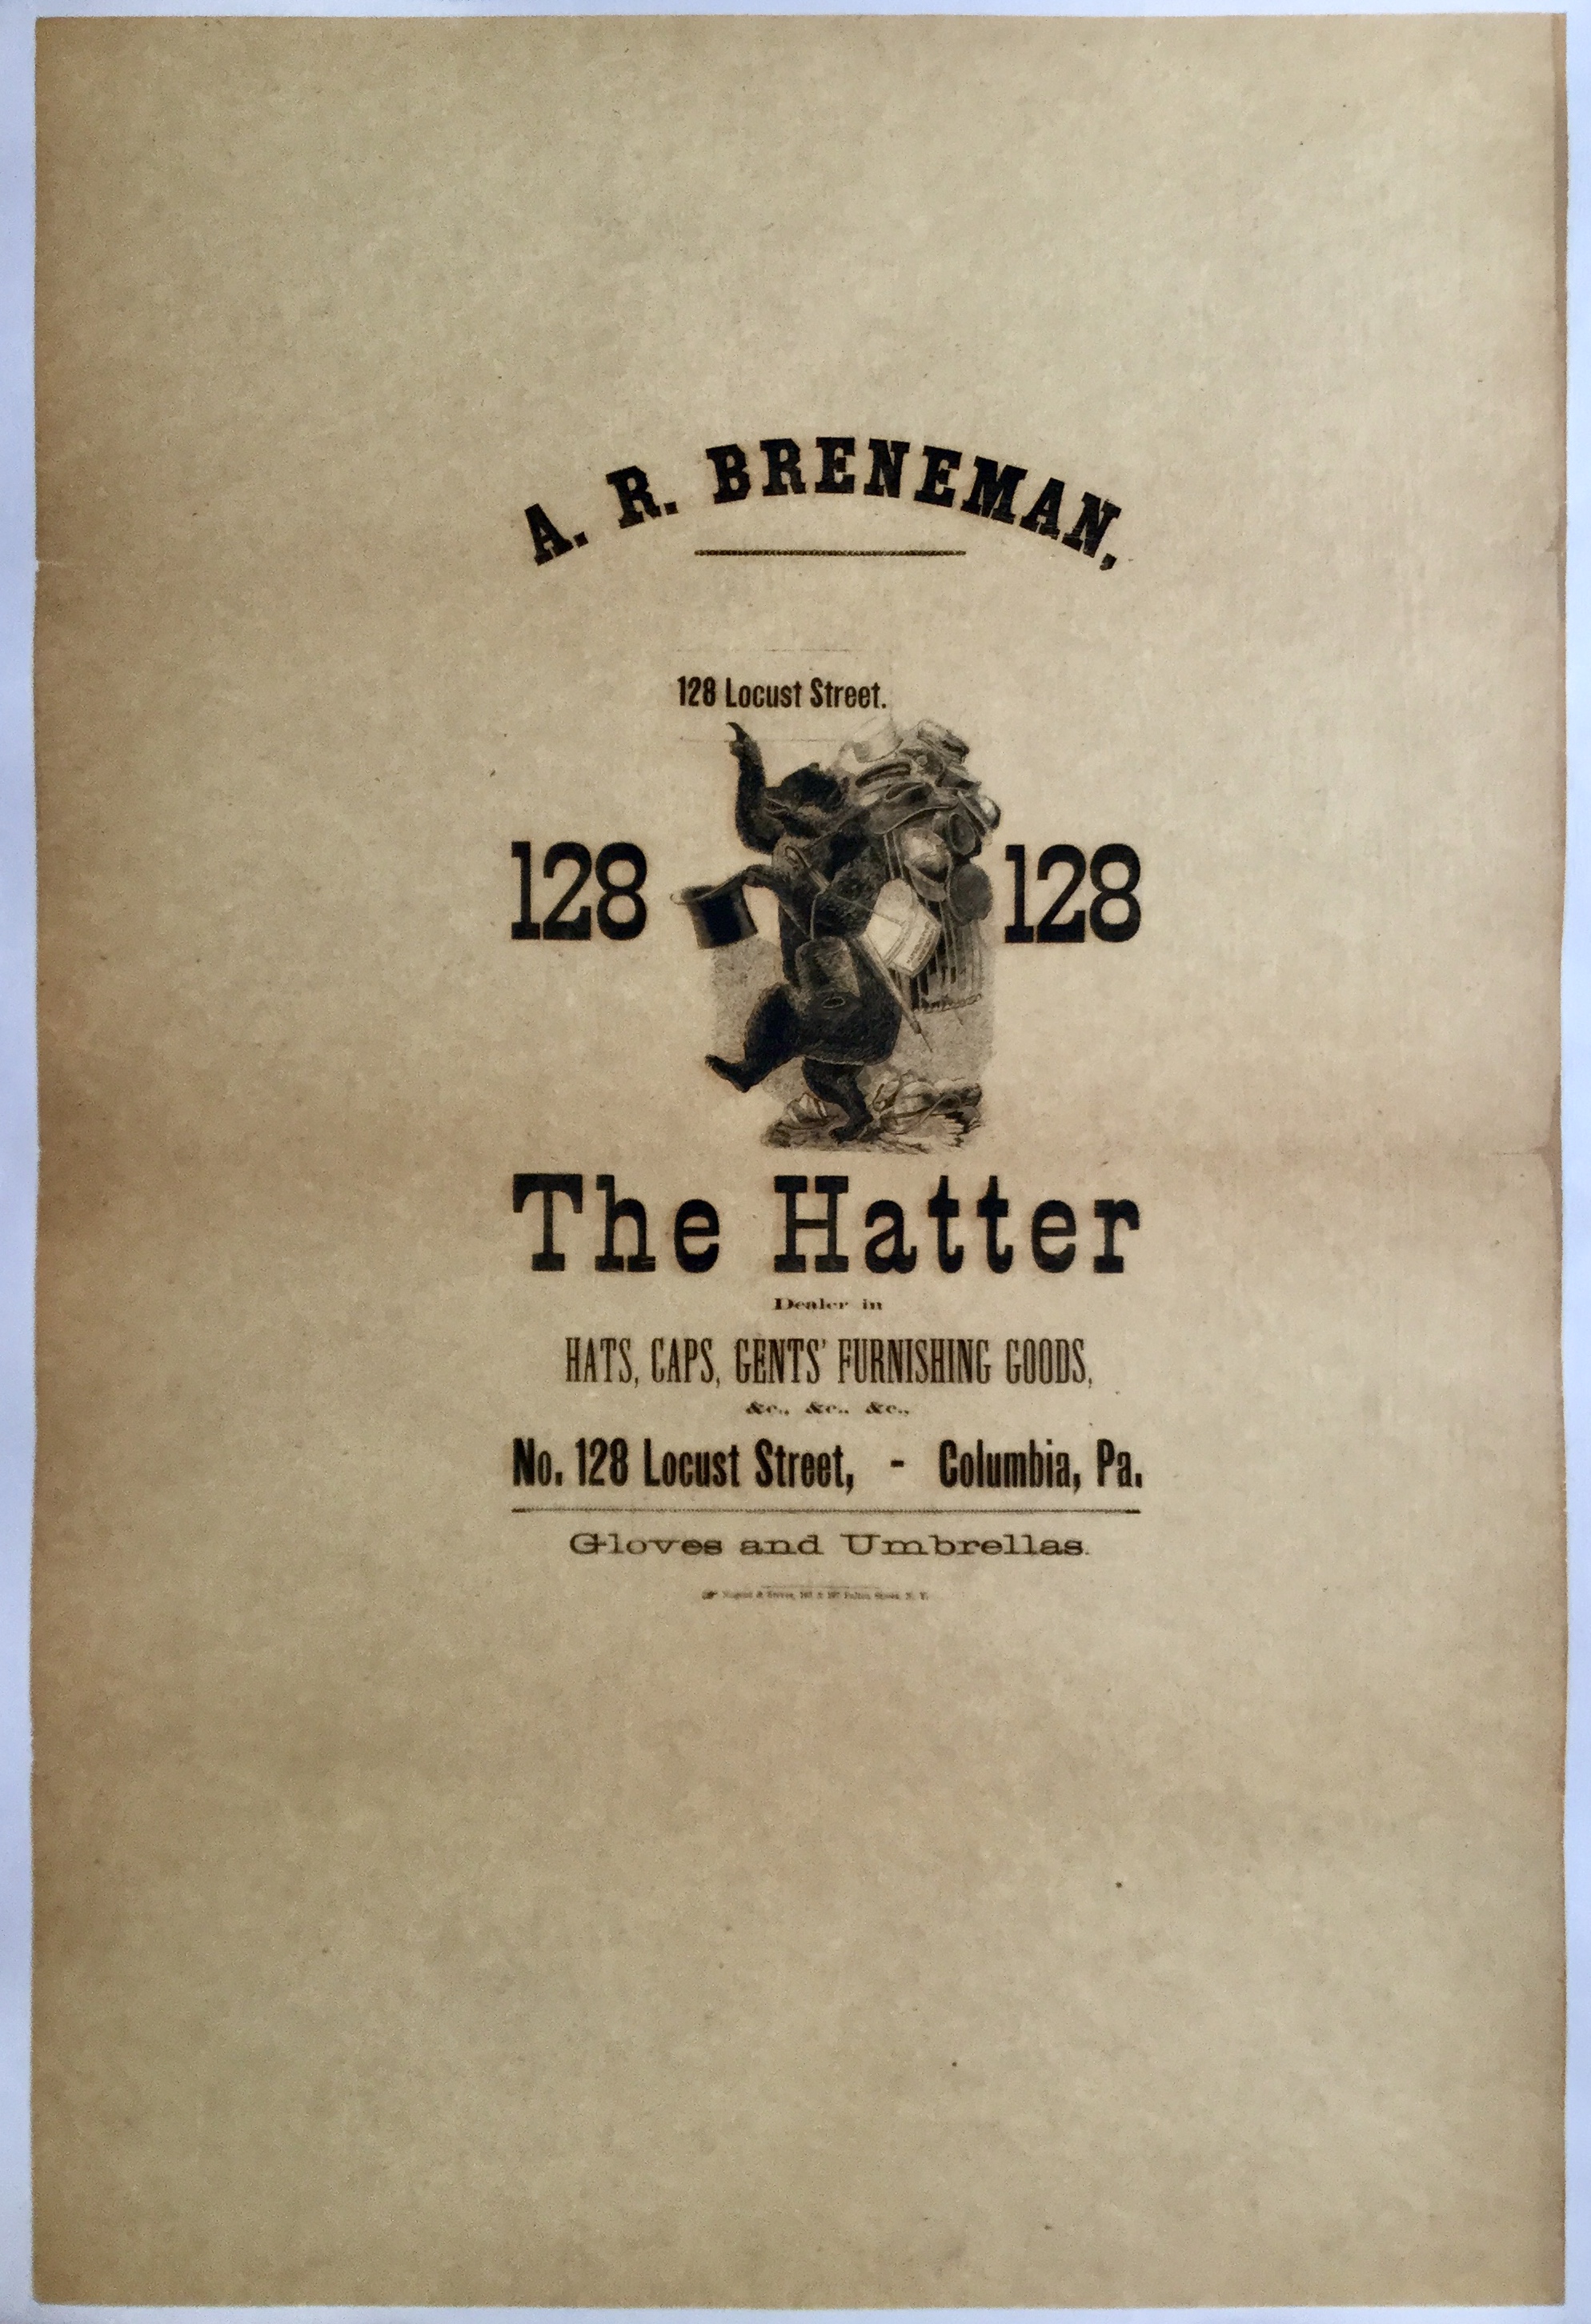 AK0178 THE HATTER - A. R. BRENEMAN - GLOVES AND UMBRELLAS